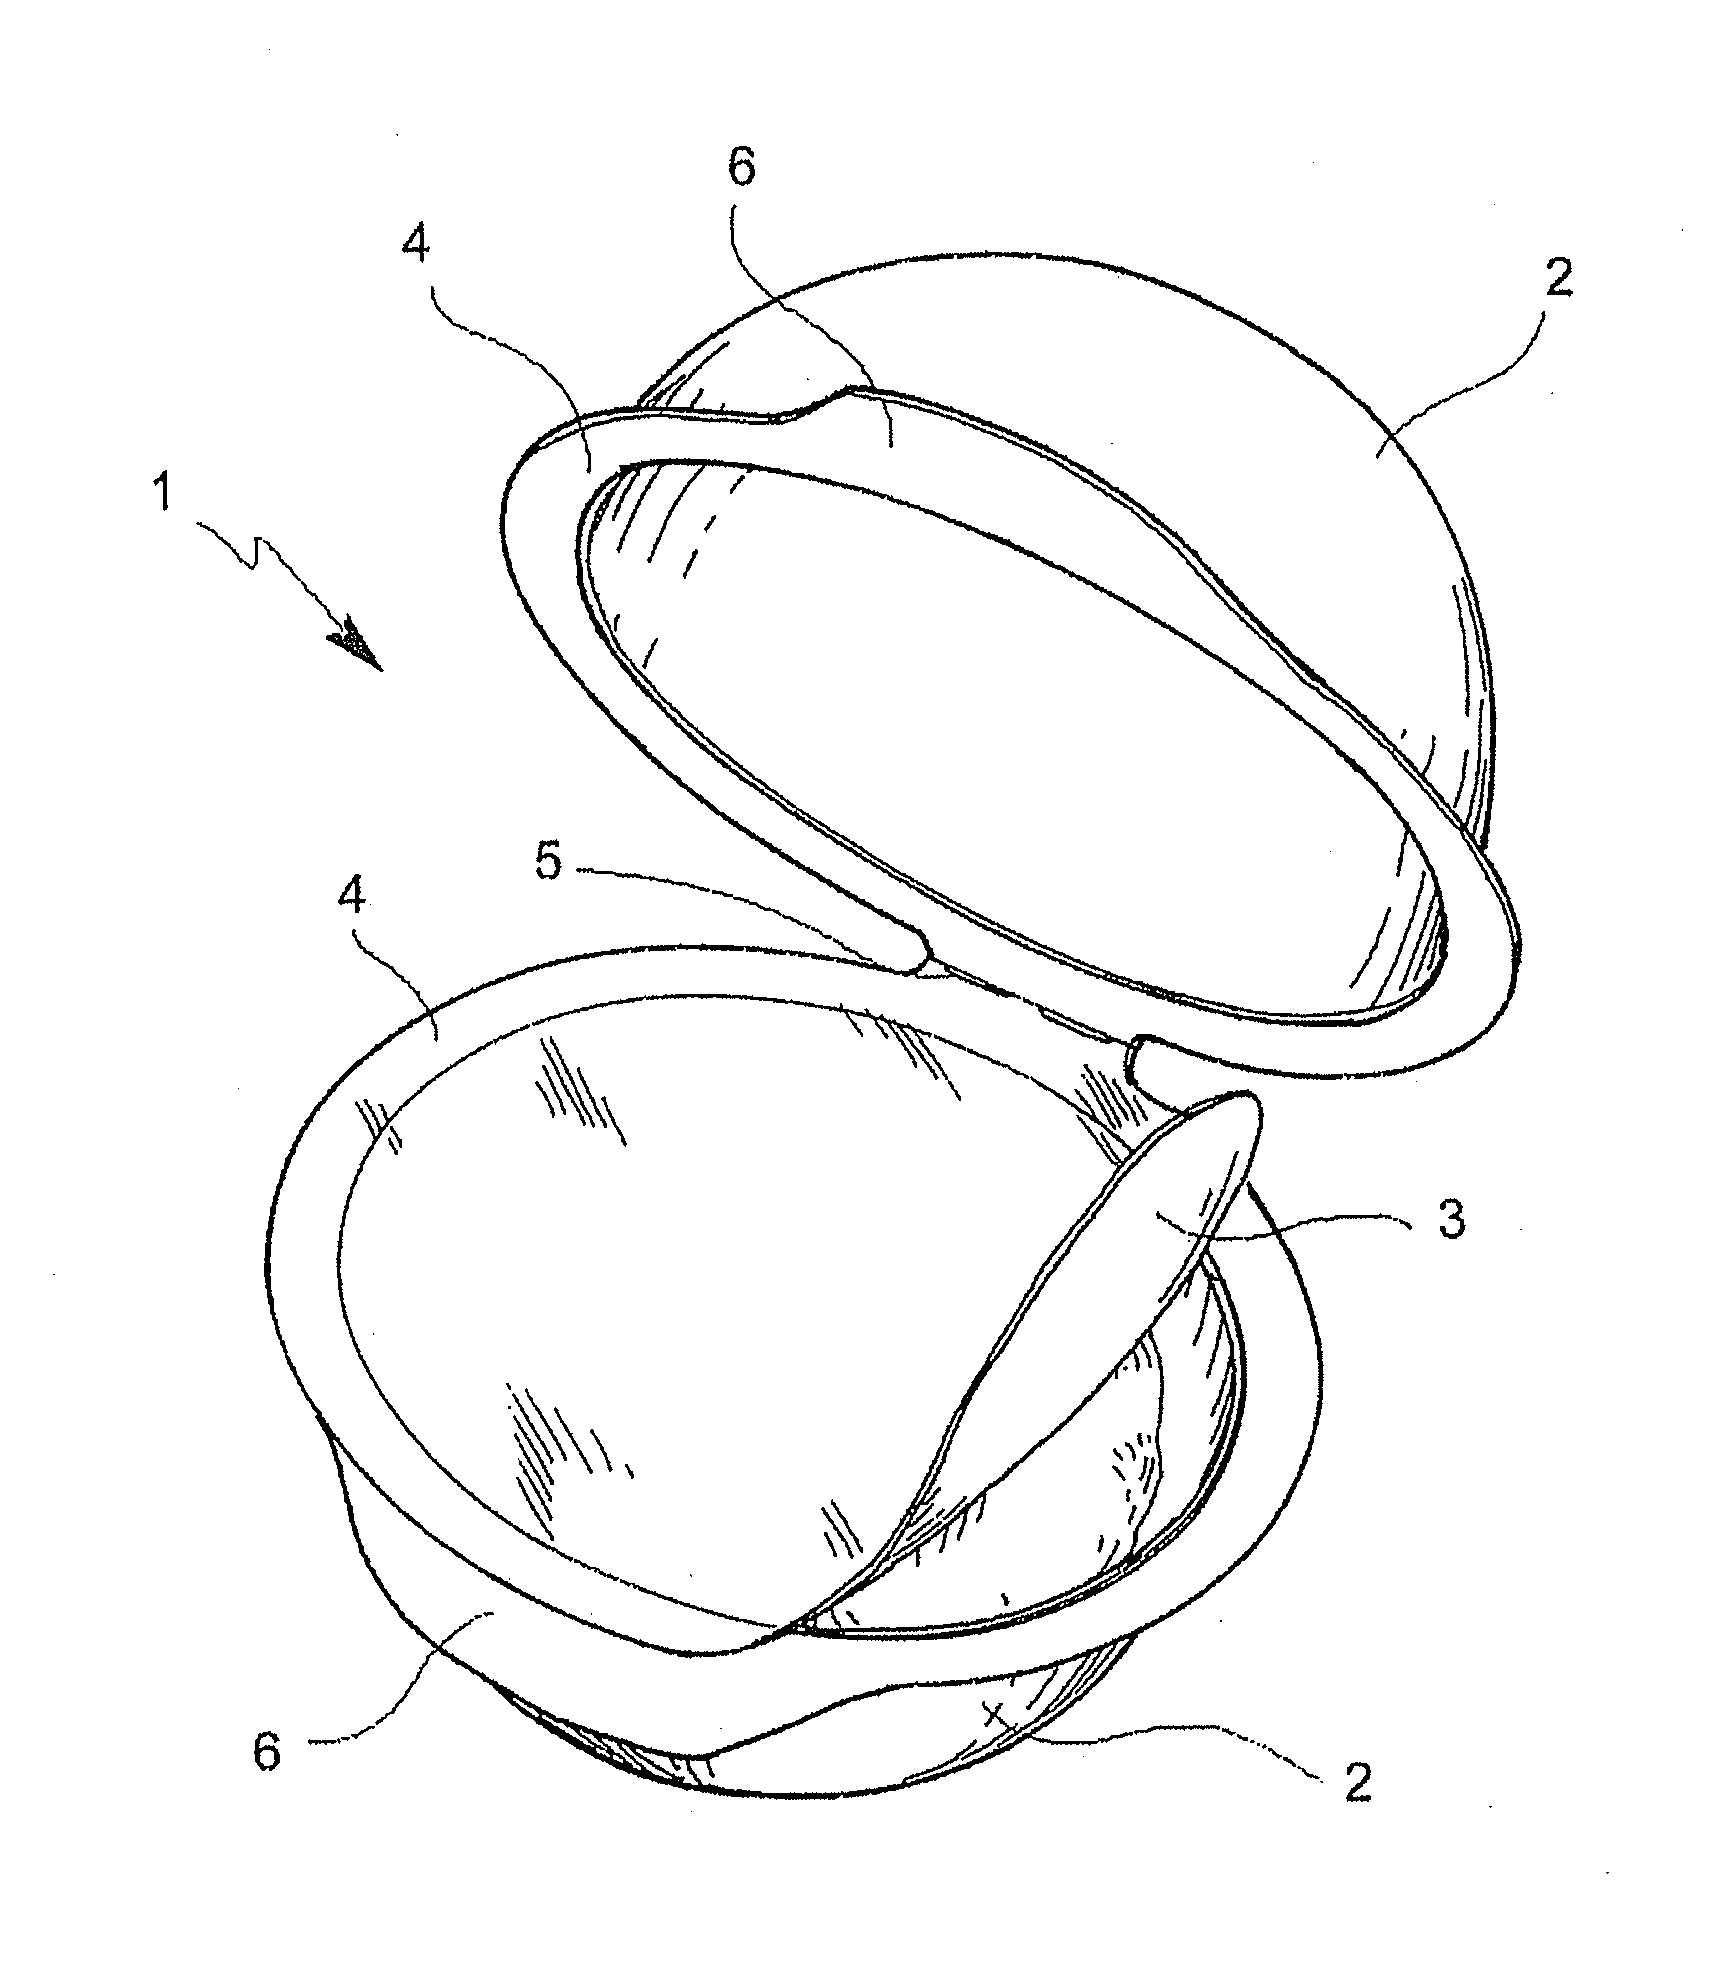 Method for producing a dairy product and system for packaging the same